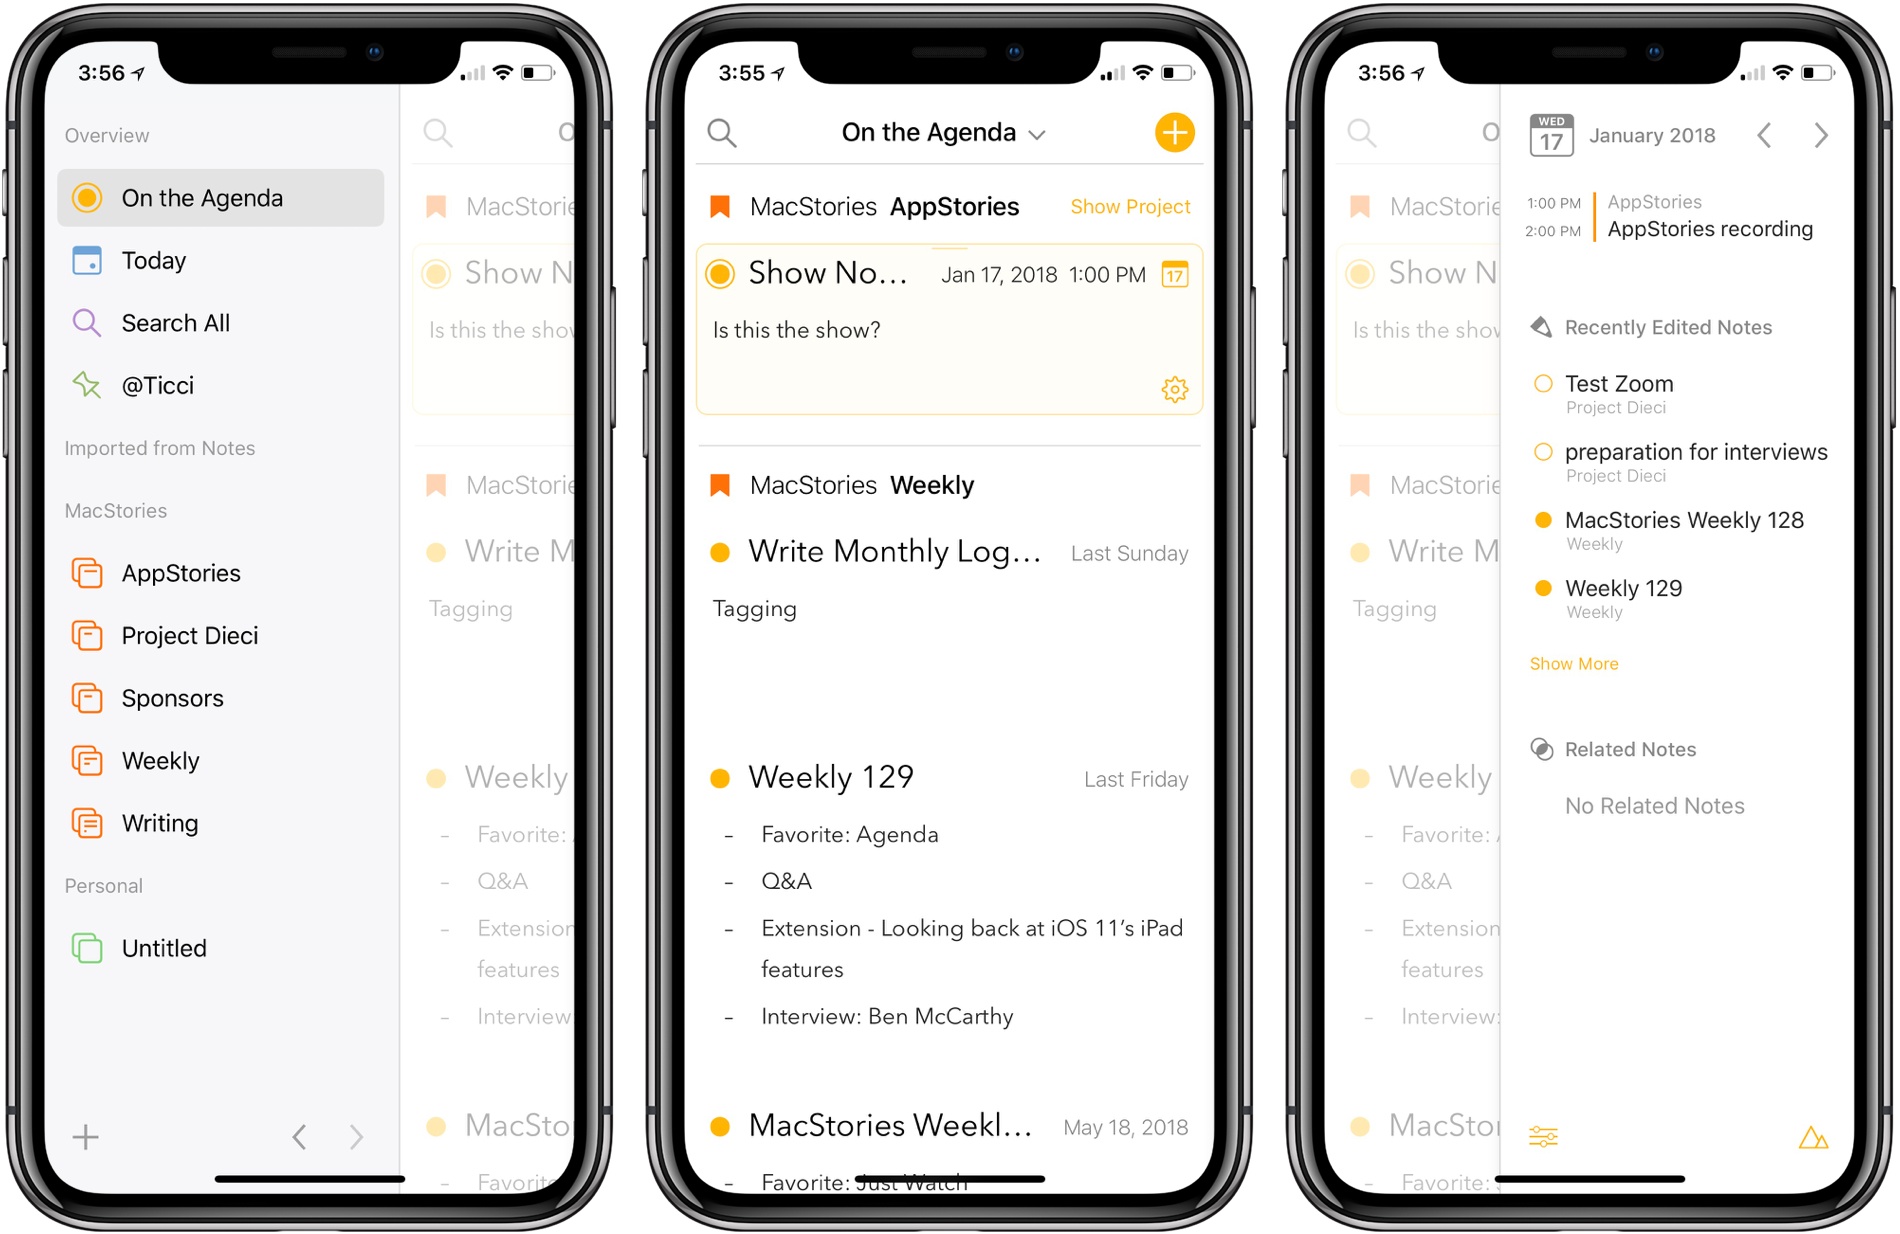 On the iPhone, Agenda uses the same sliding panels where they dominate most of the screen.